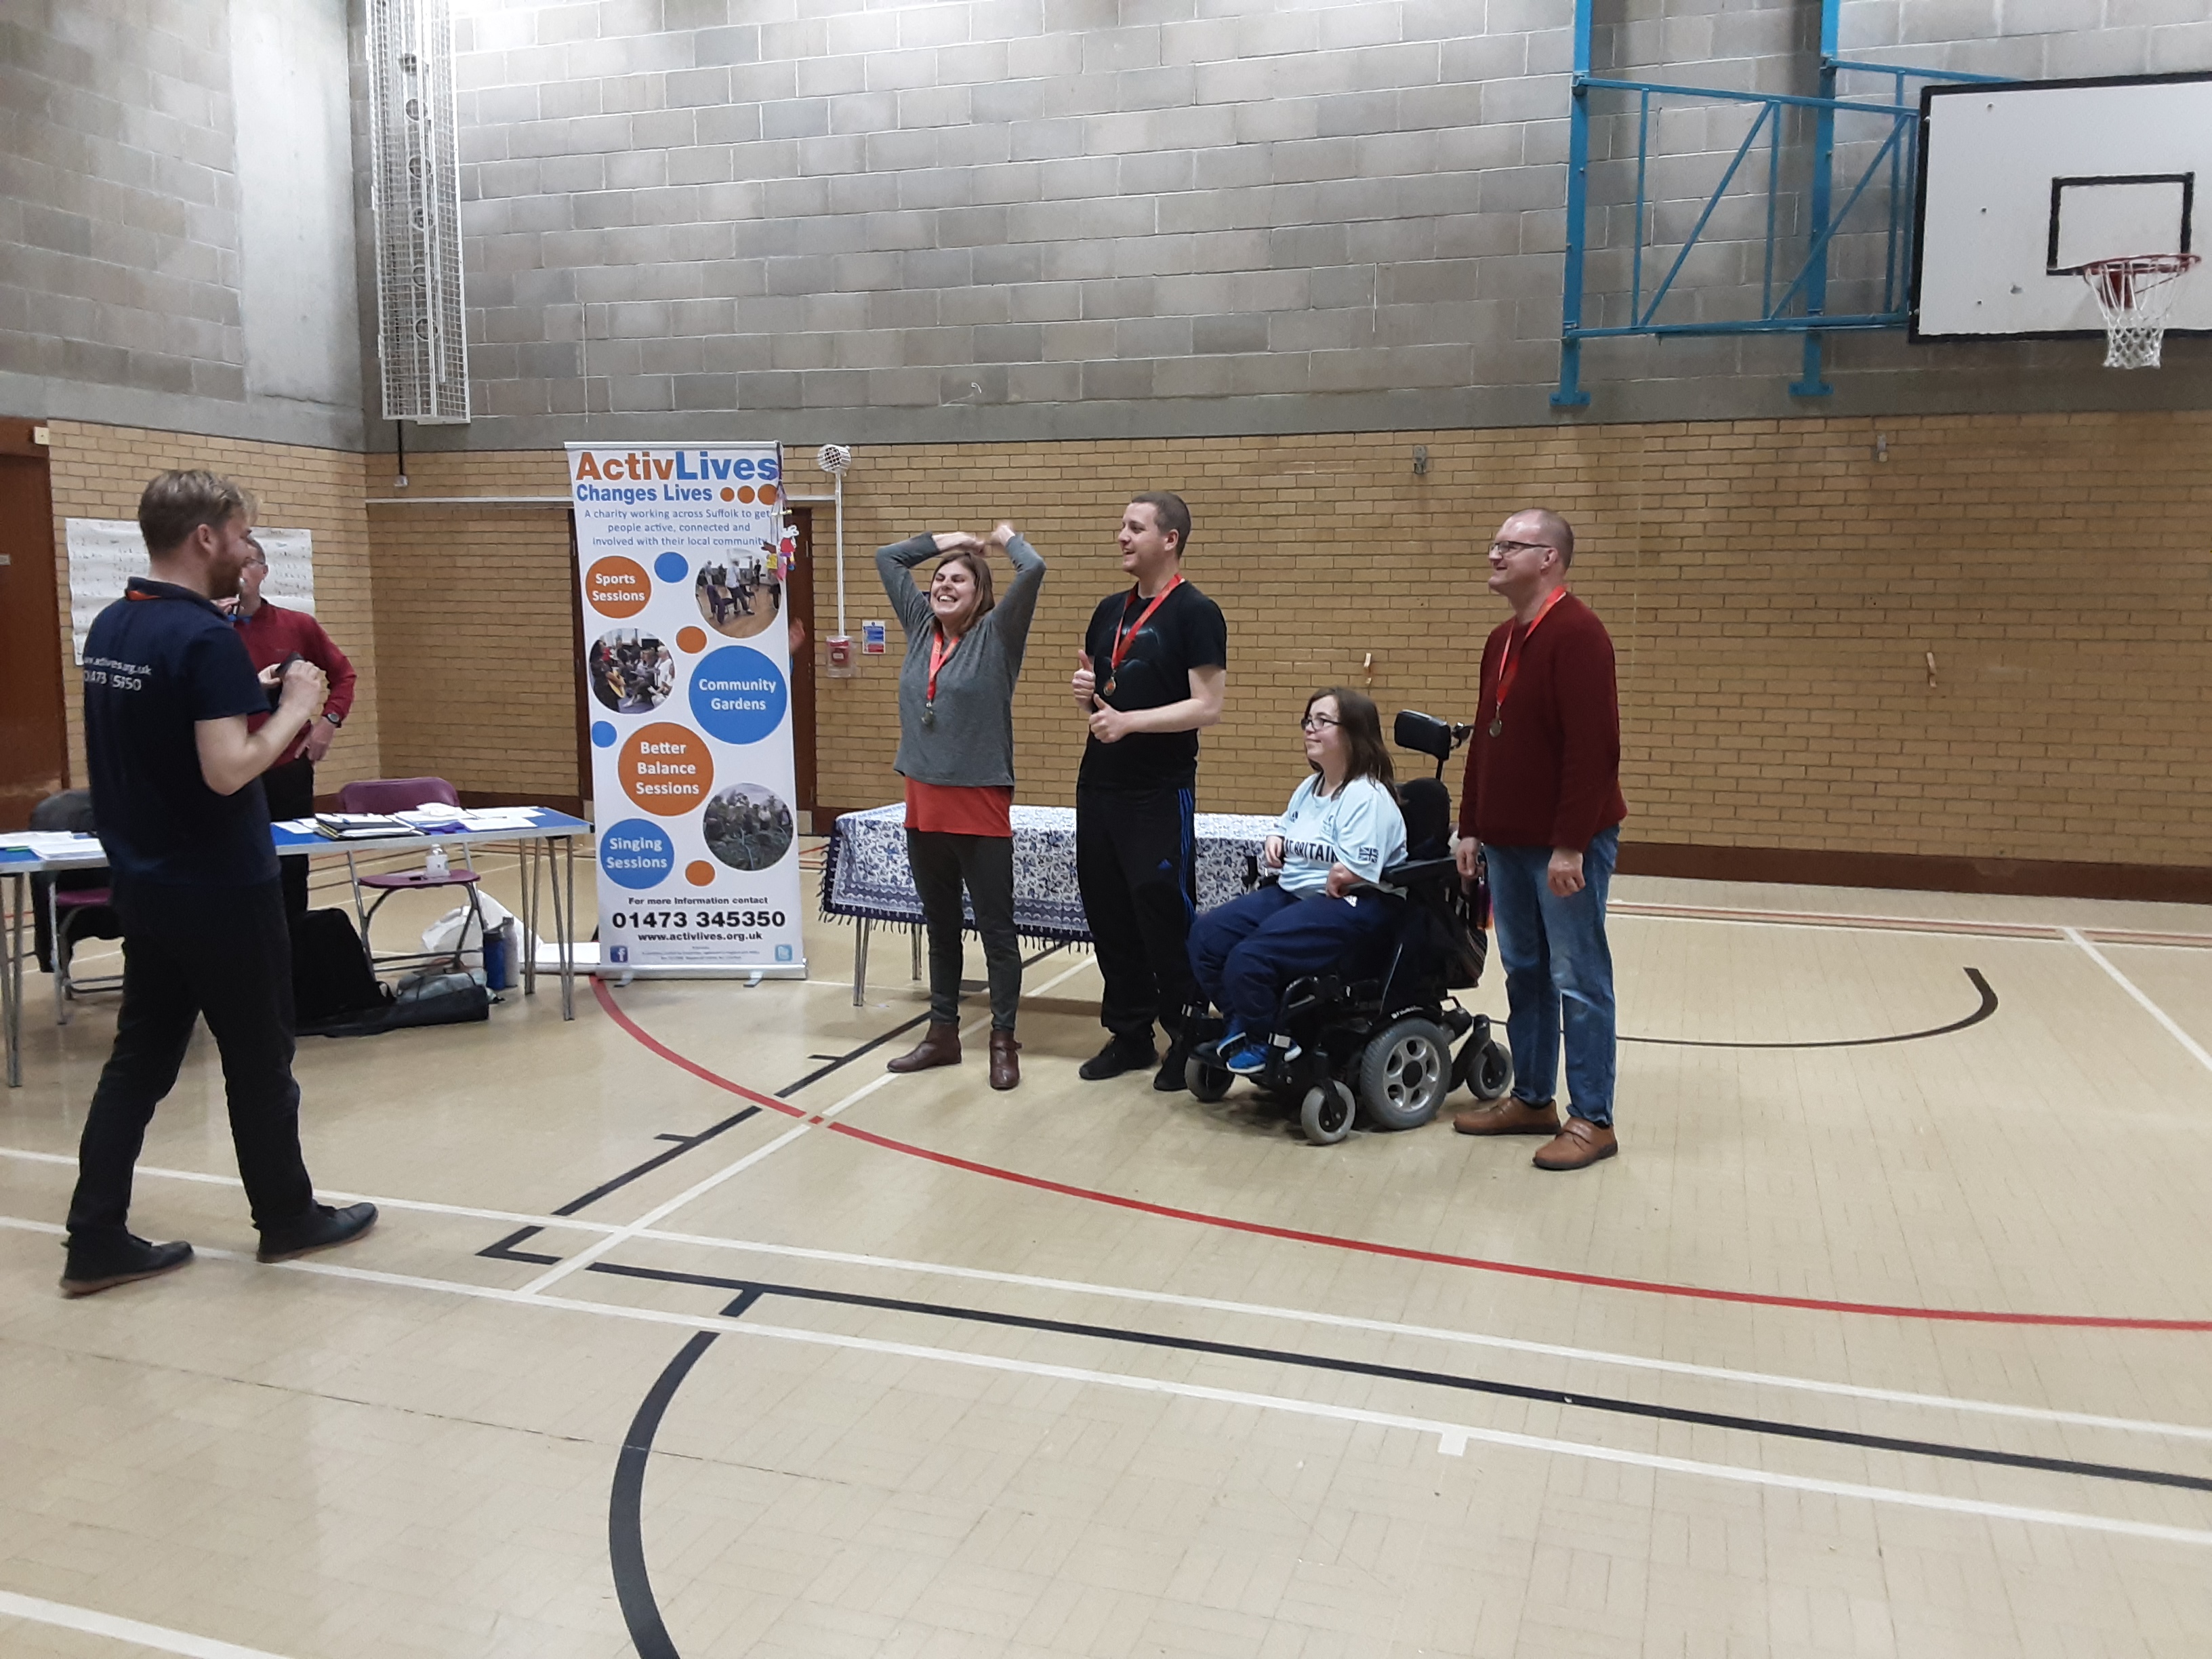 Announcing the winners at the Boccia festival